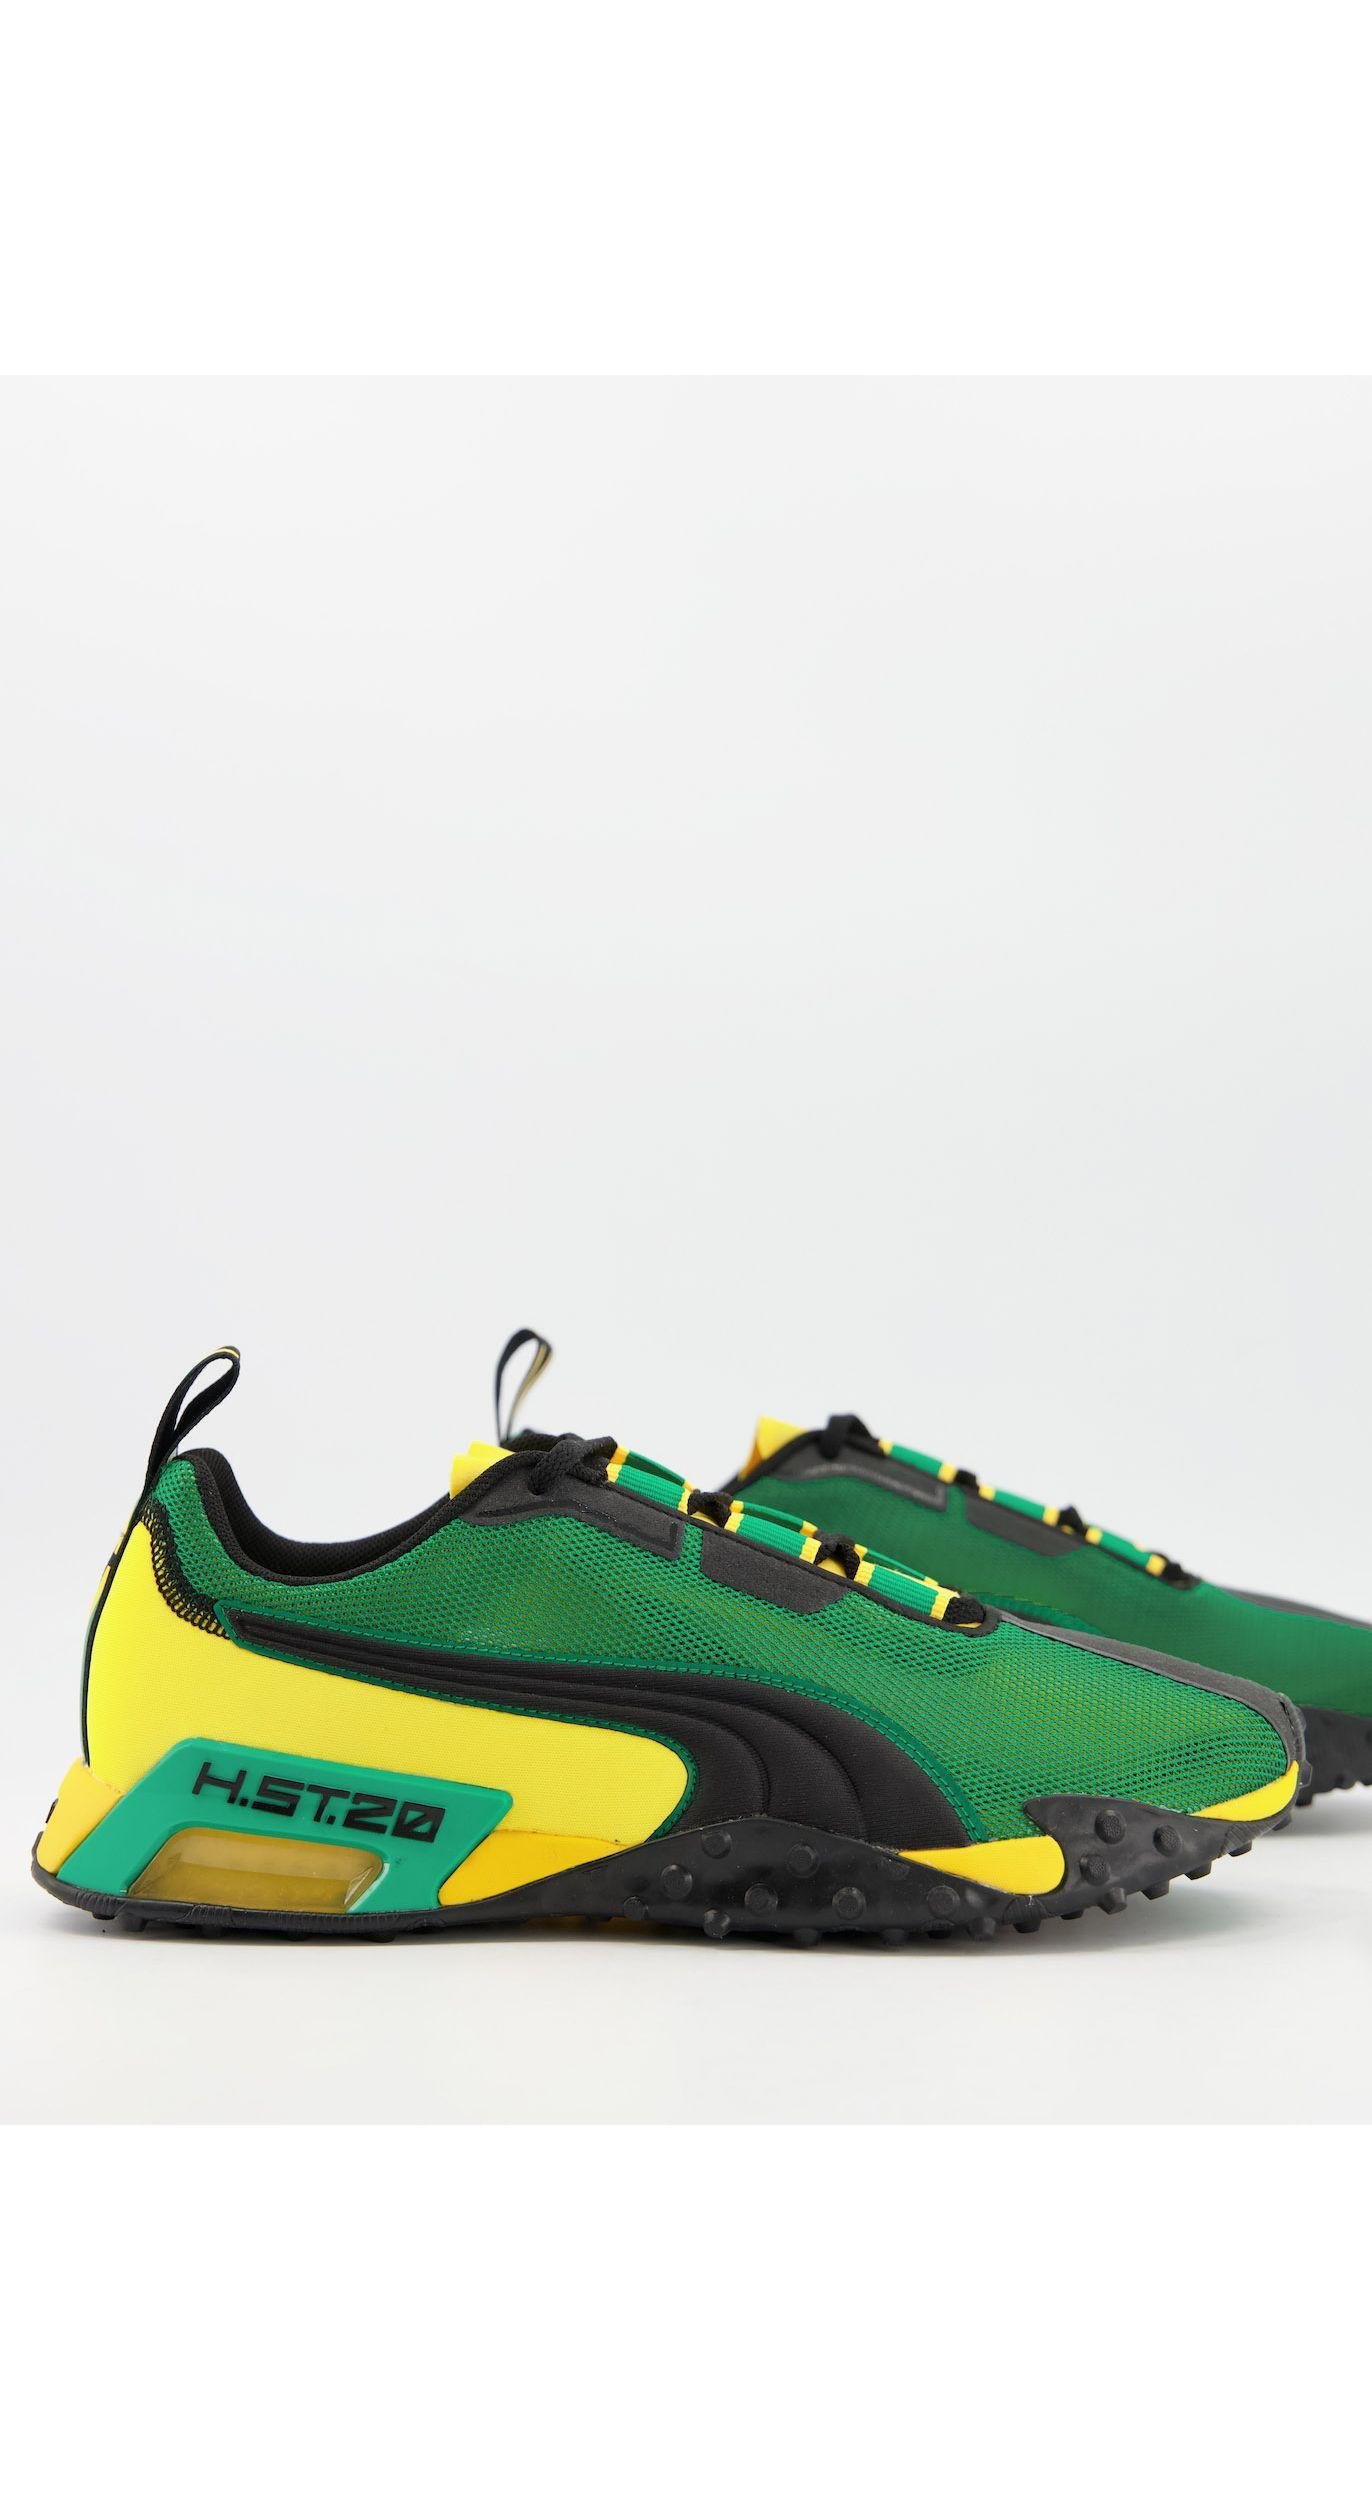 Slight Wither What's wrong PUMA H.st.20 Jamaica Sneakers in Yellow for Men | Lyst